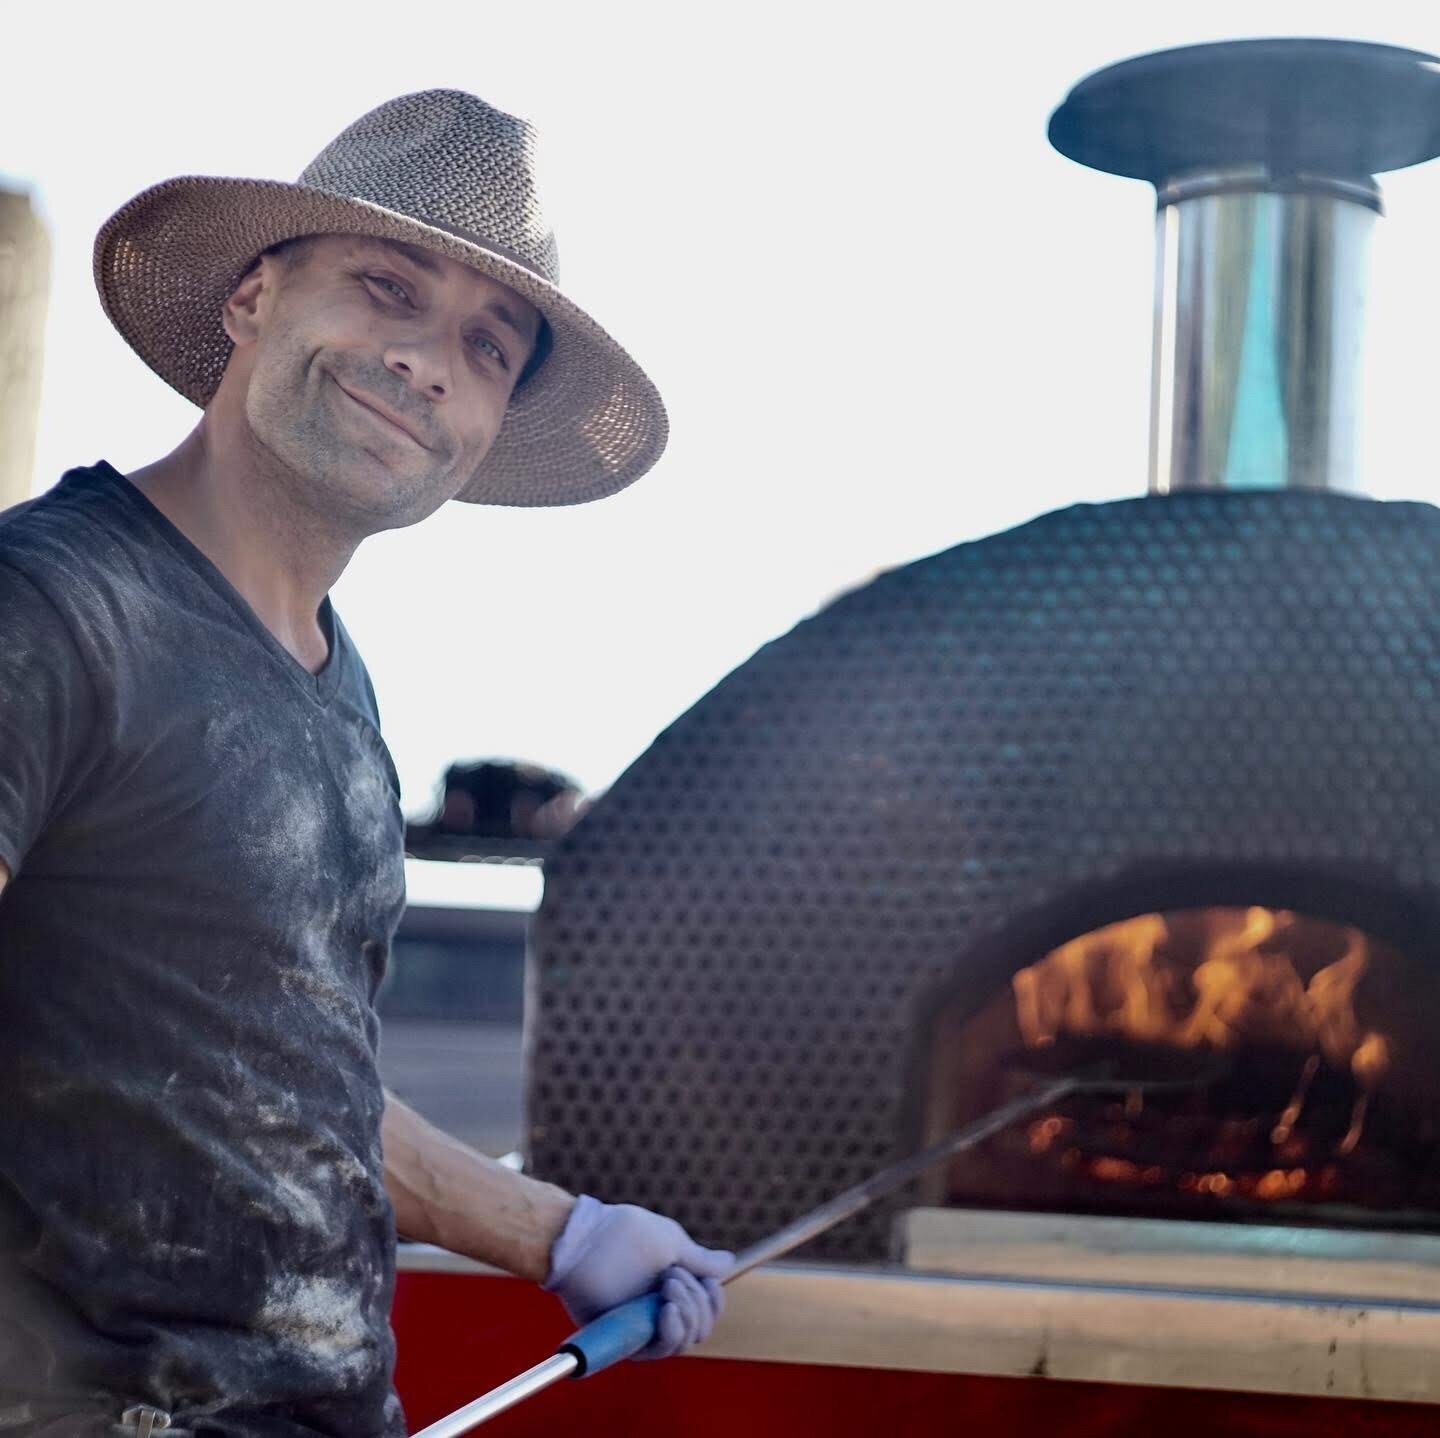 www.santabarbarawedding.com | Firefly Pizza Company | Baking Pizza in the Oven